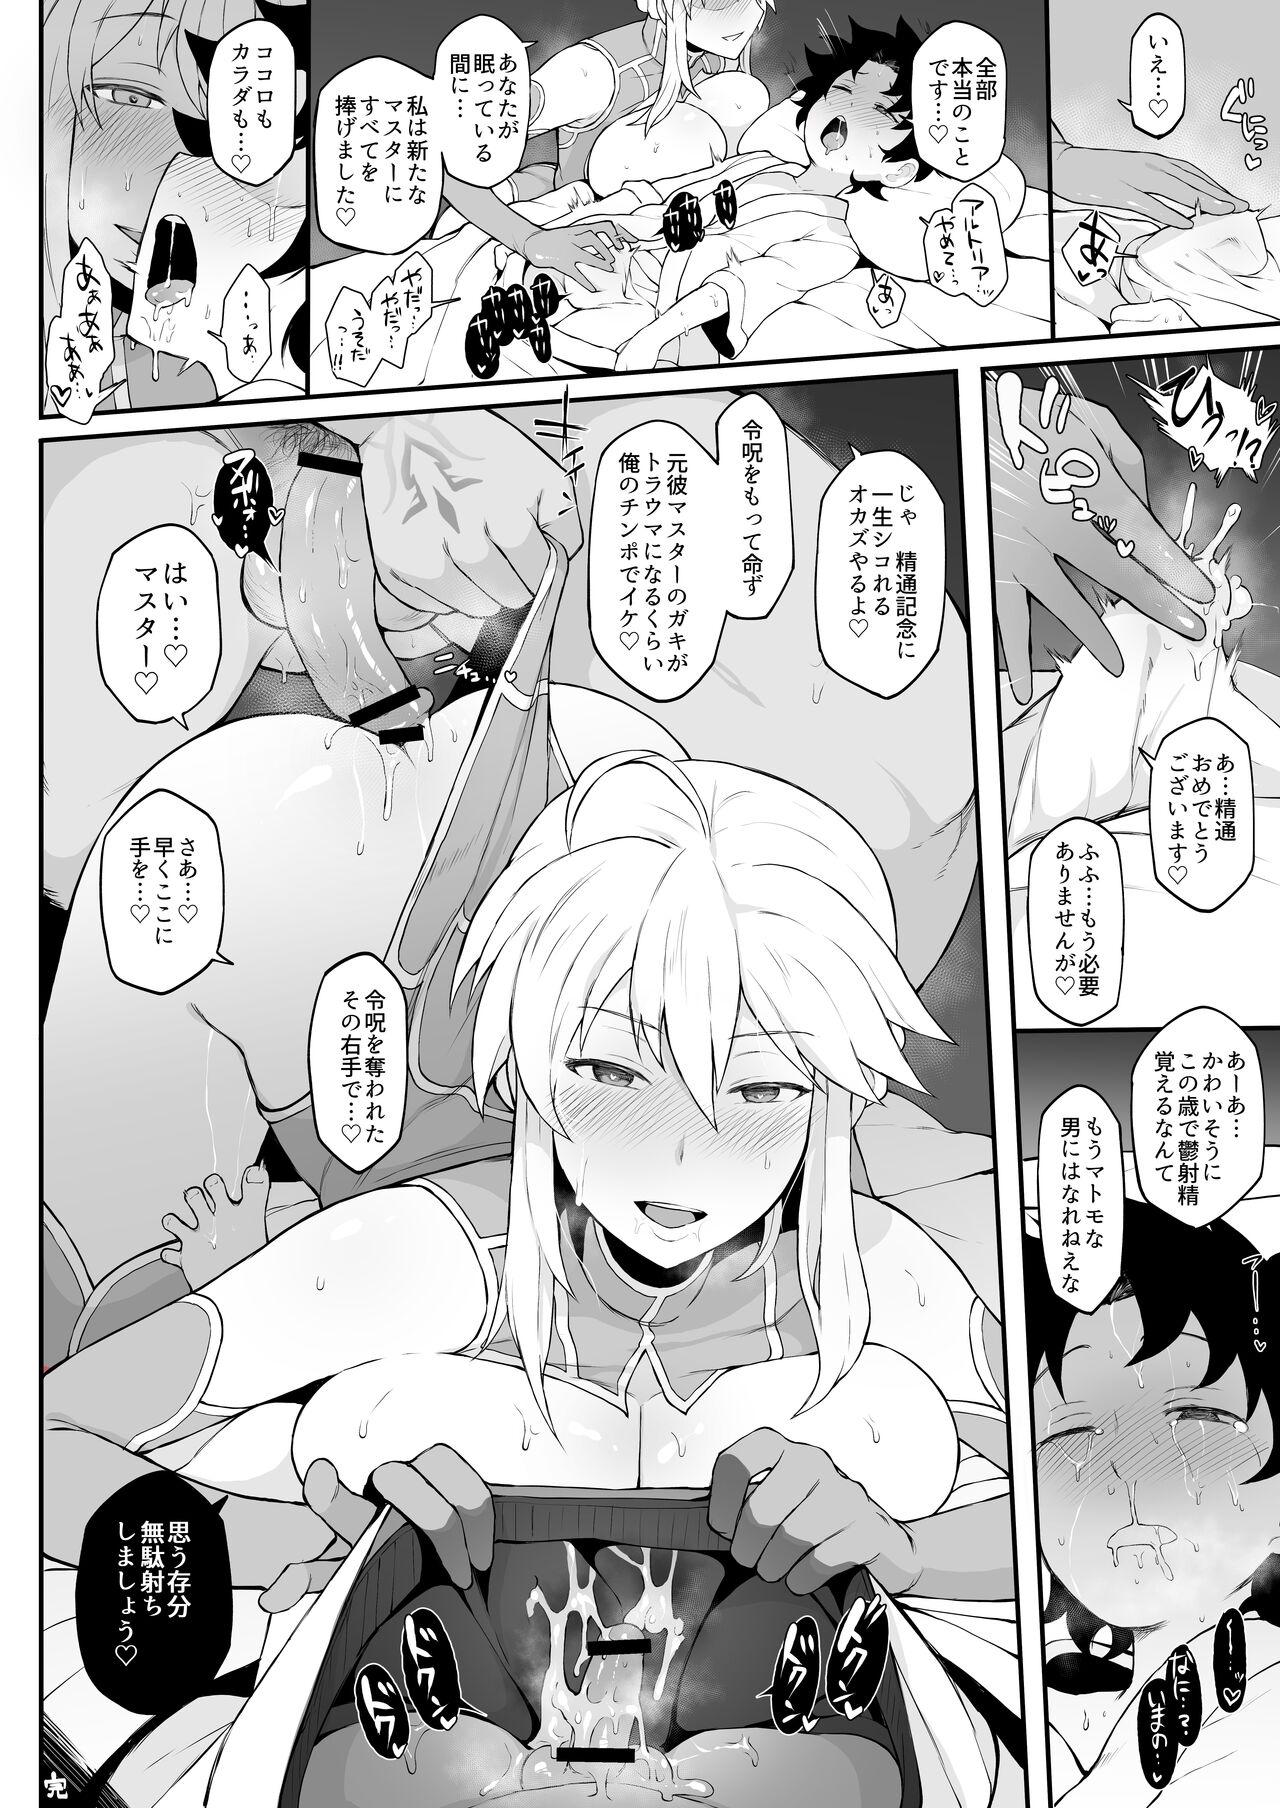 Hiddencam No Title - Fate grand order Trimmed - Page 18